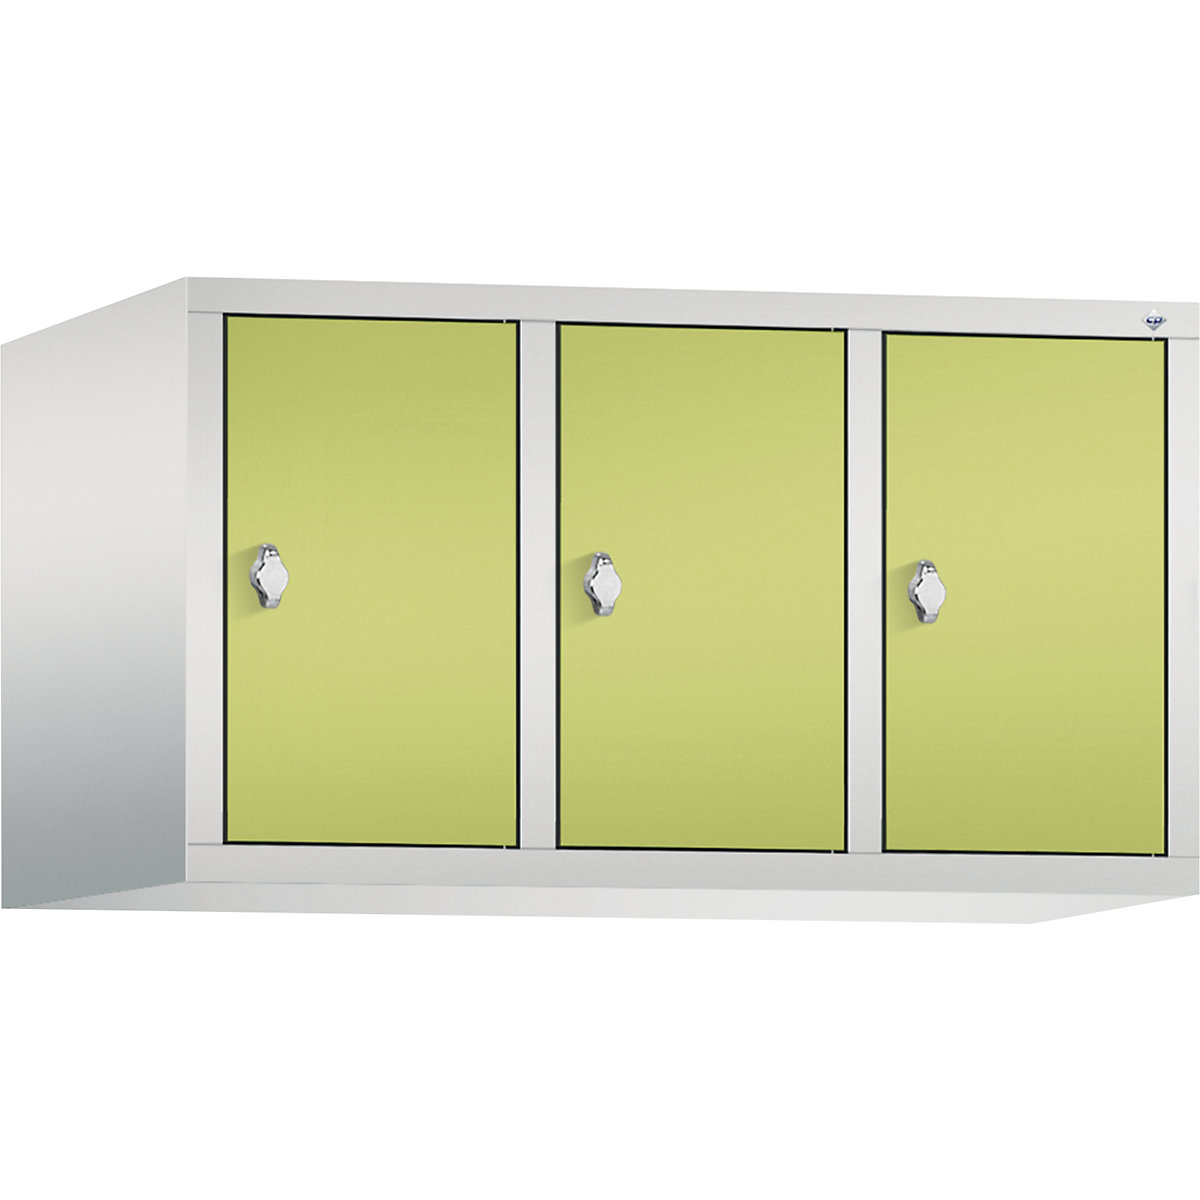 CLASSIC add-on cupboard – C+P, 3 compartments, compartment width 300 mm, light grey / viridian green-13